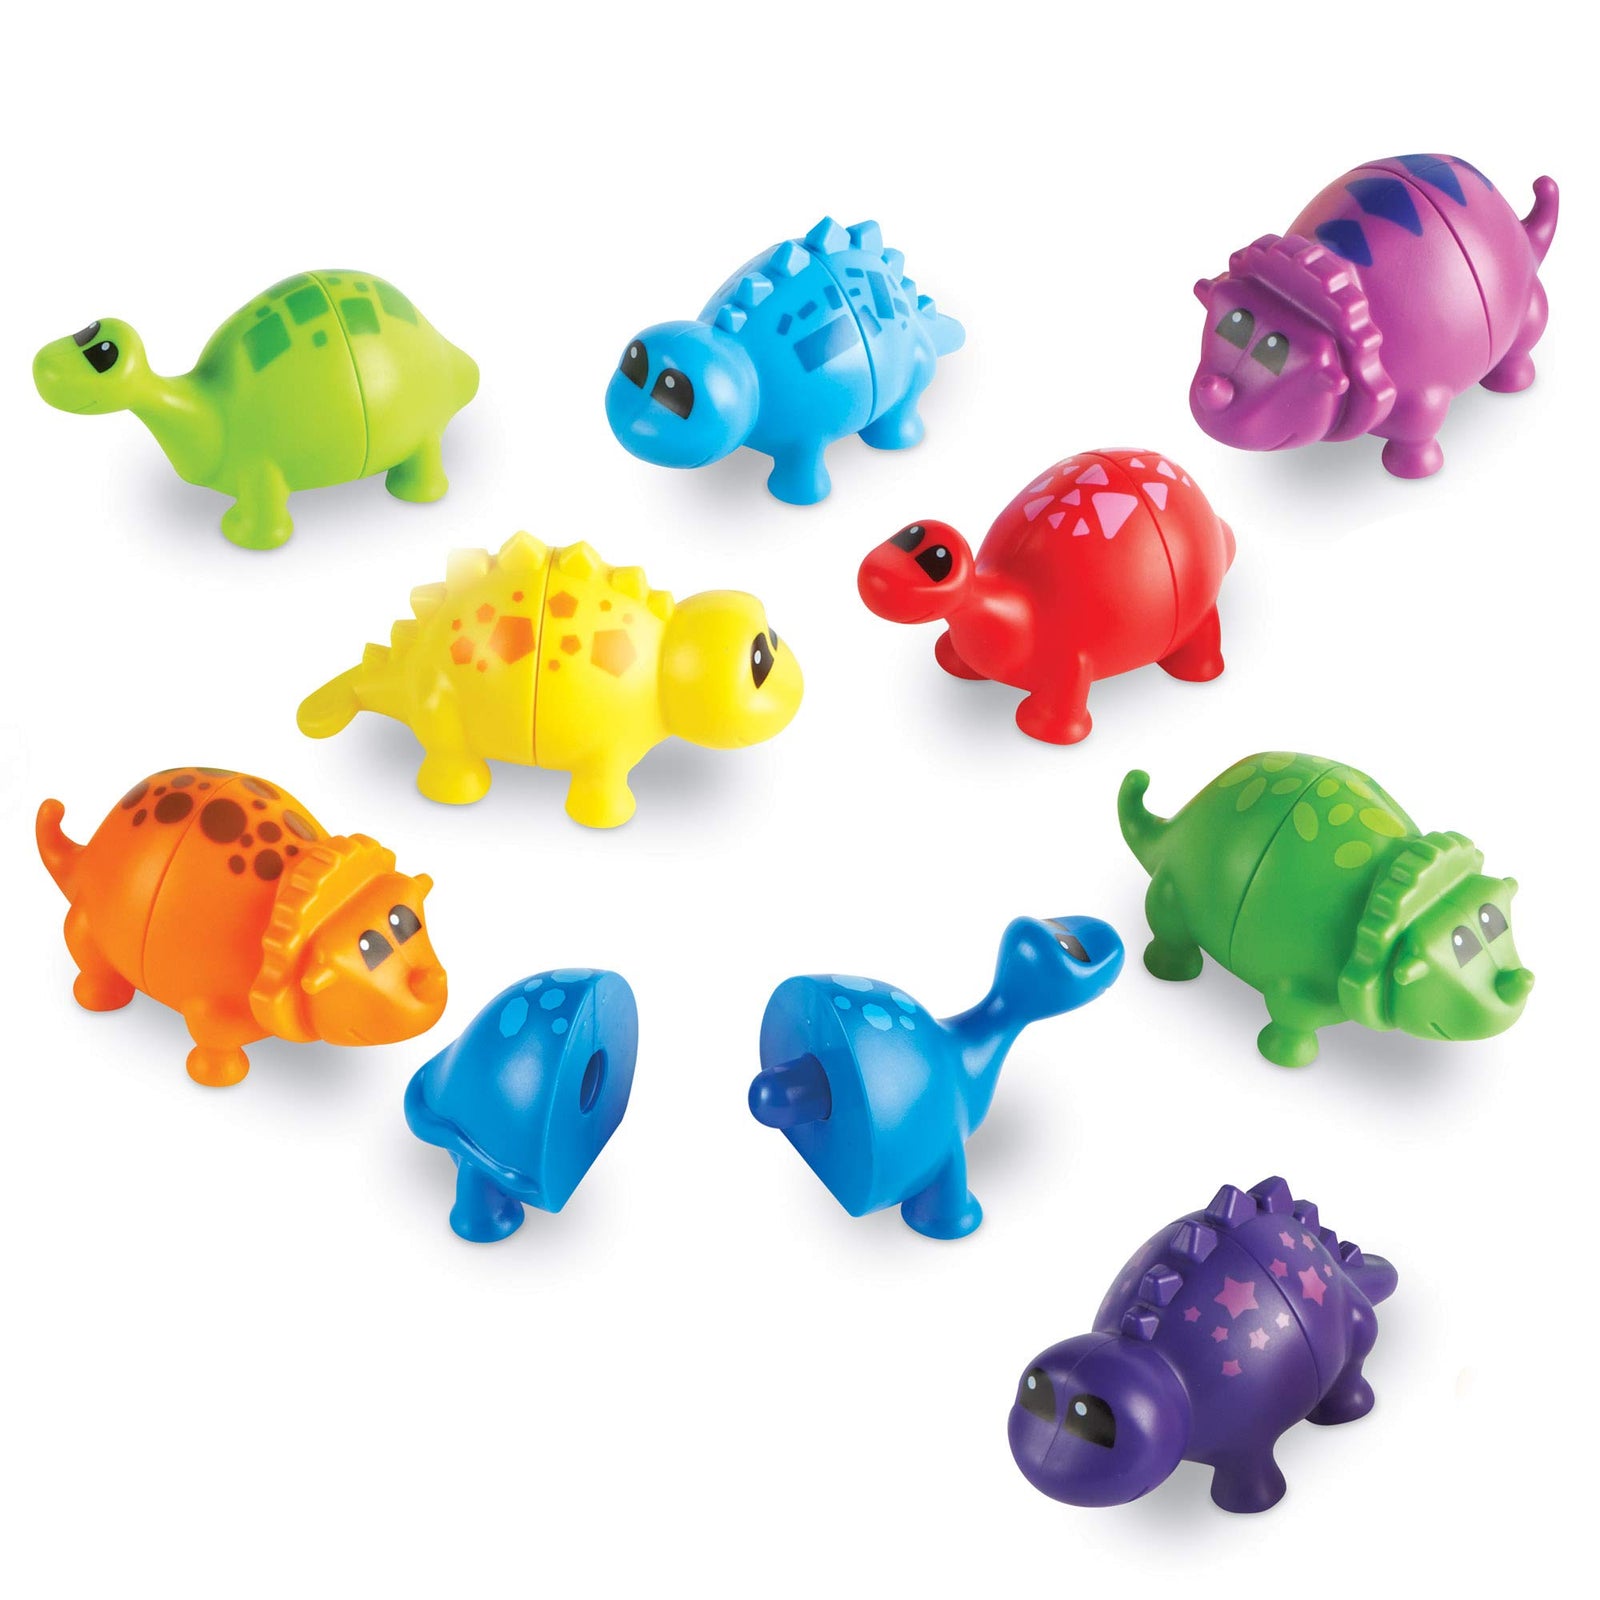 Learning Resources Snap-n-Learn Matching Dinos, Fine Motor, Counting & Sorting Toy, Shape Sorting, 18 Pieces, Dinosaurs Toys , Ages 18+ months